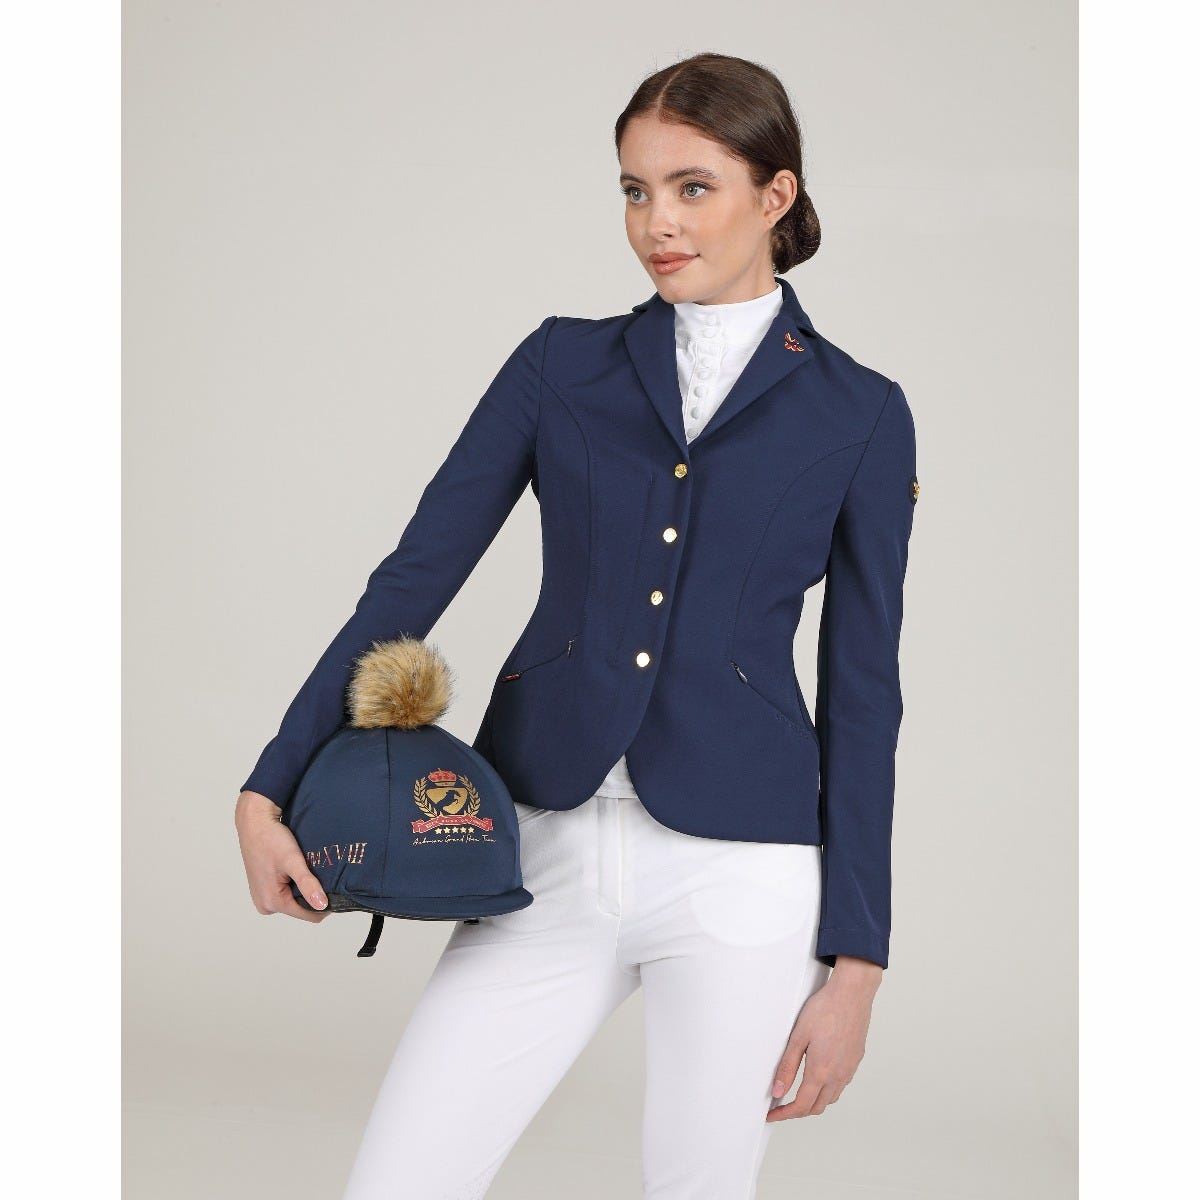 Shires Aubrion Team Show Jacket - Just Horse Riders